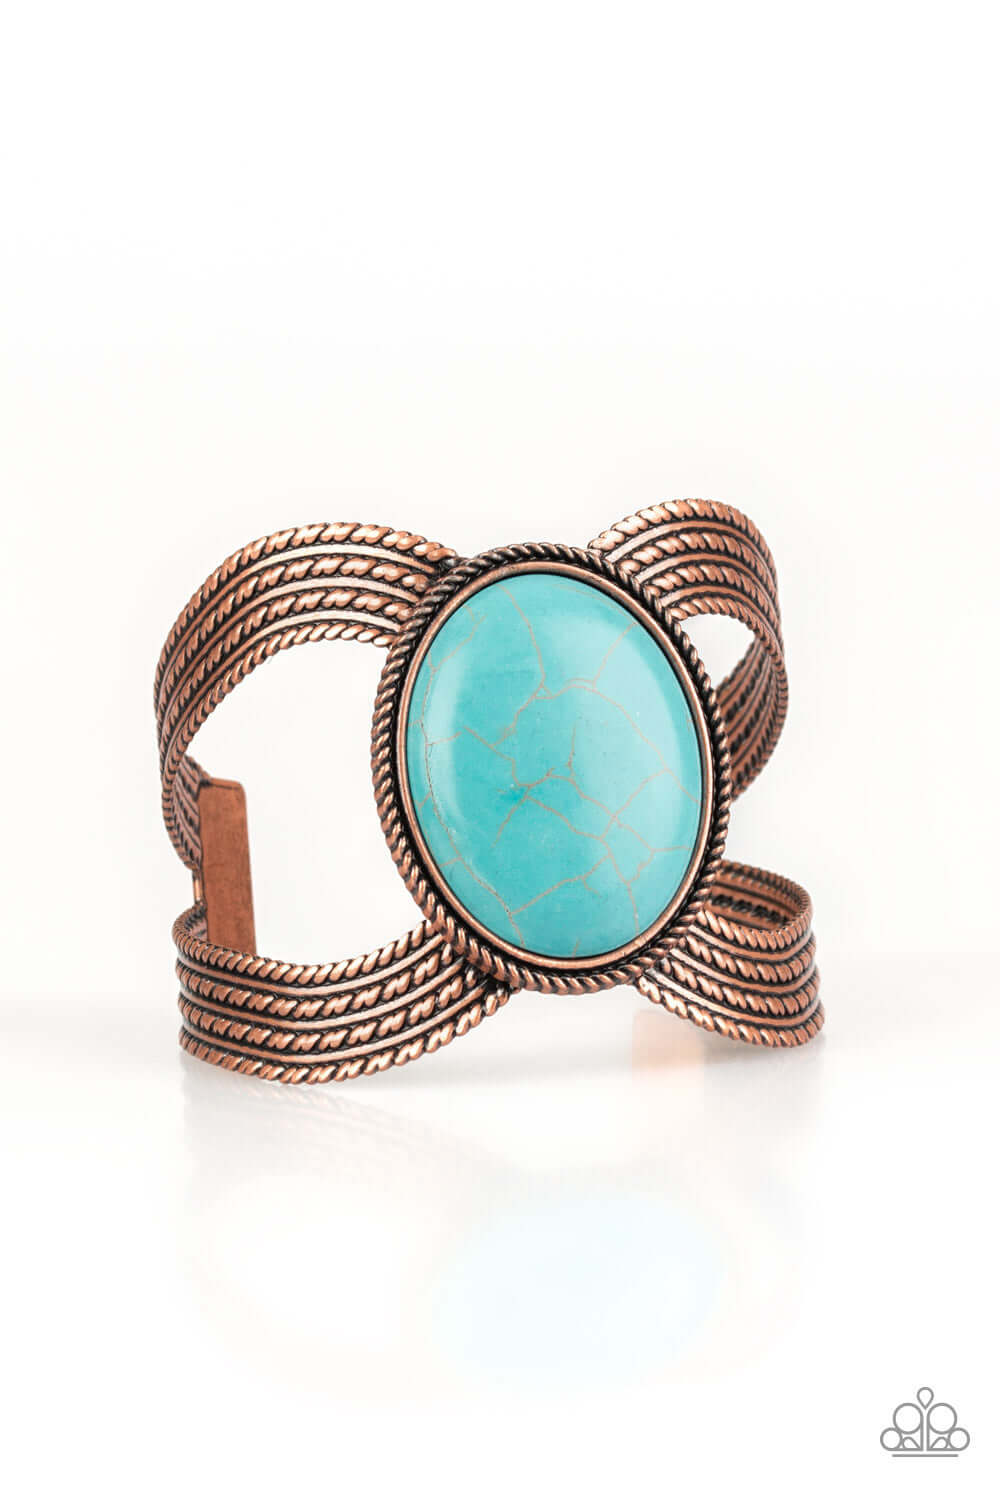 Coyote Couture - Copper Bracelet - TheMasterCollection